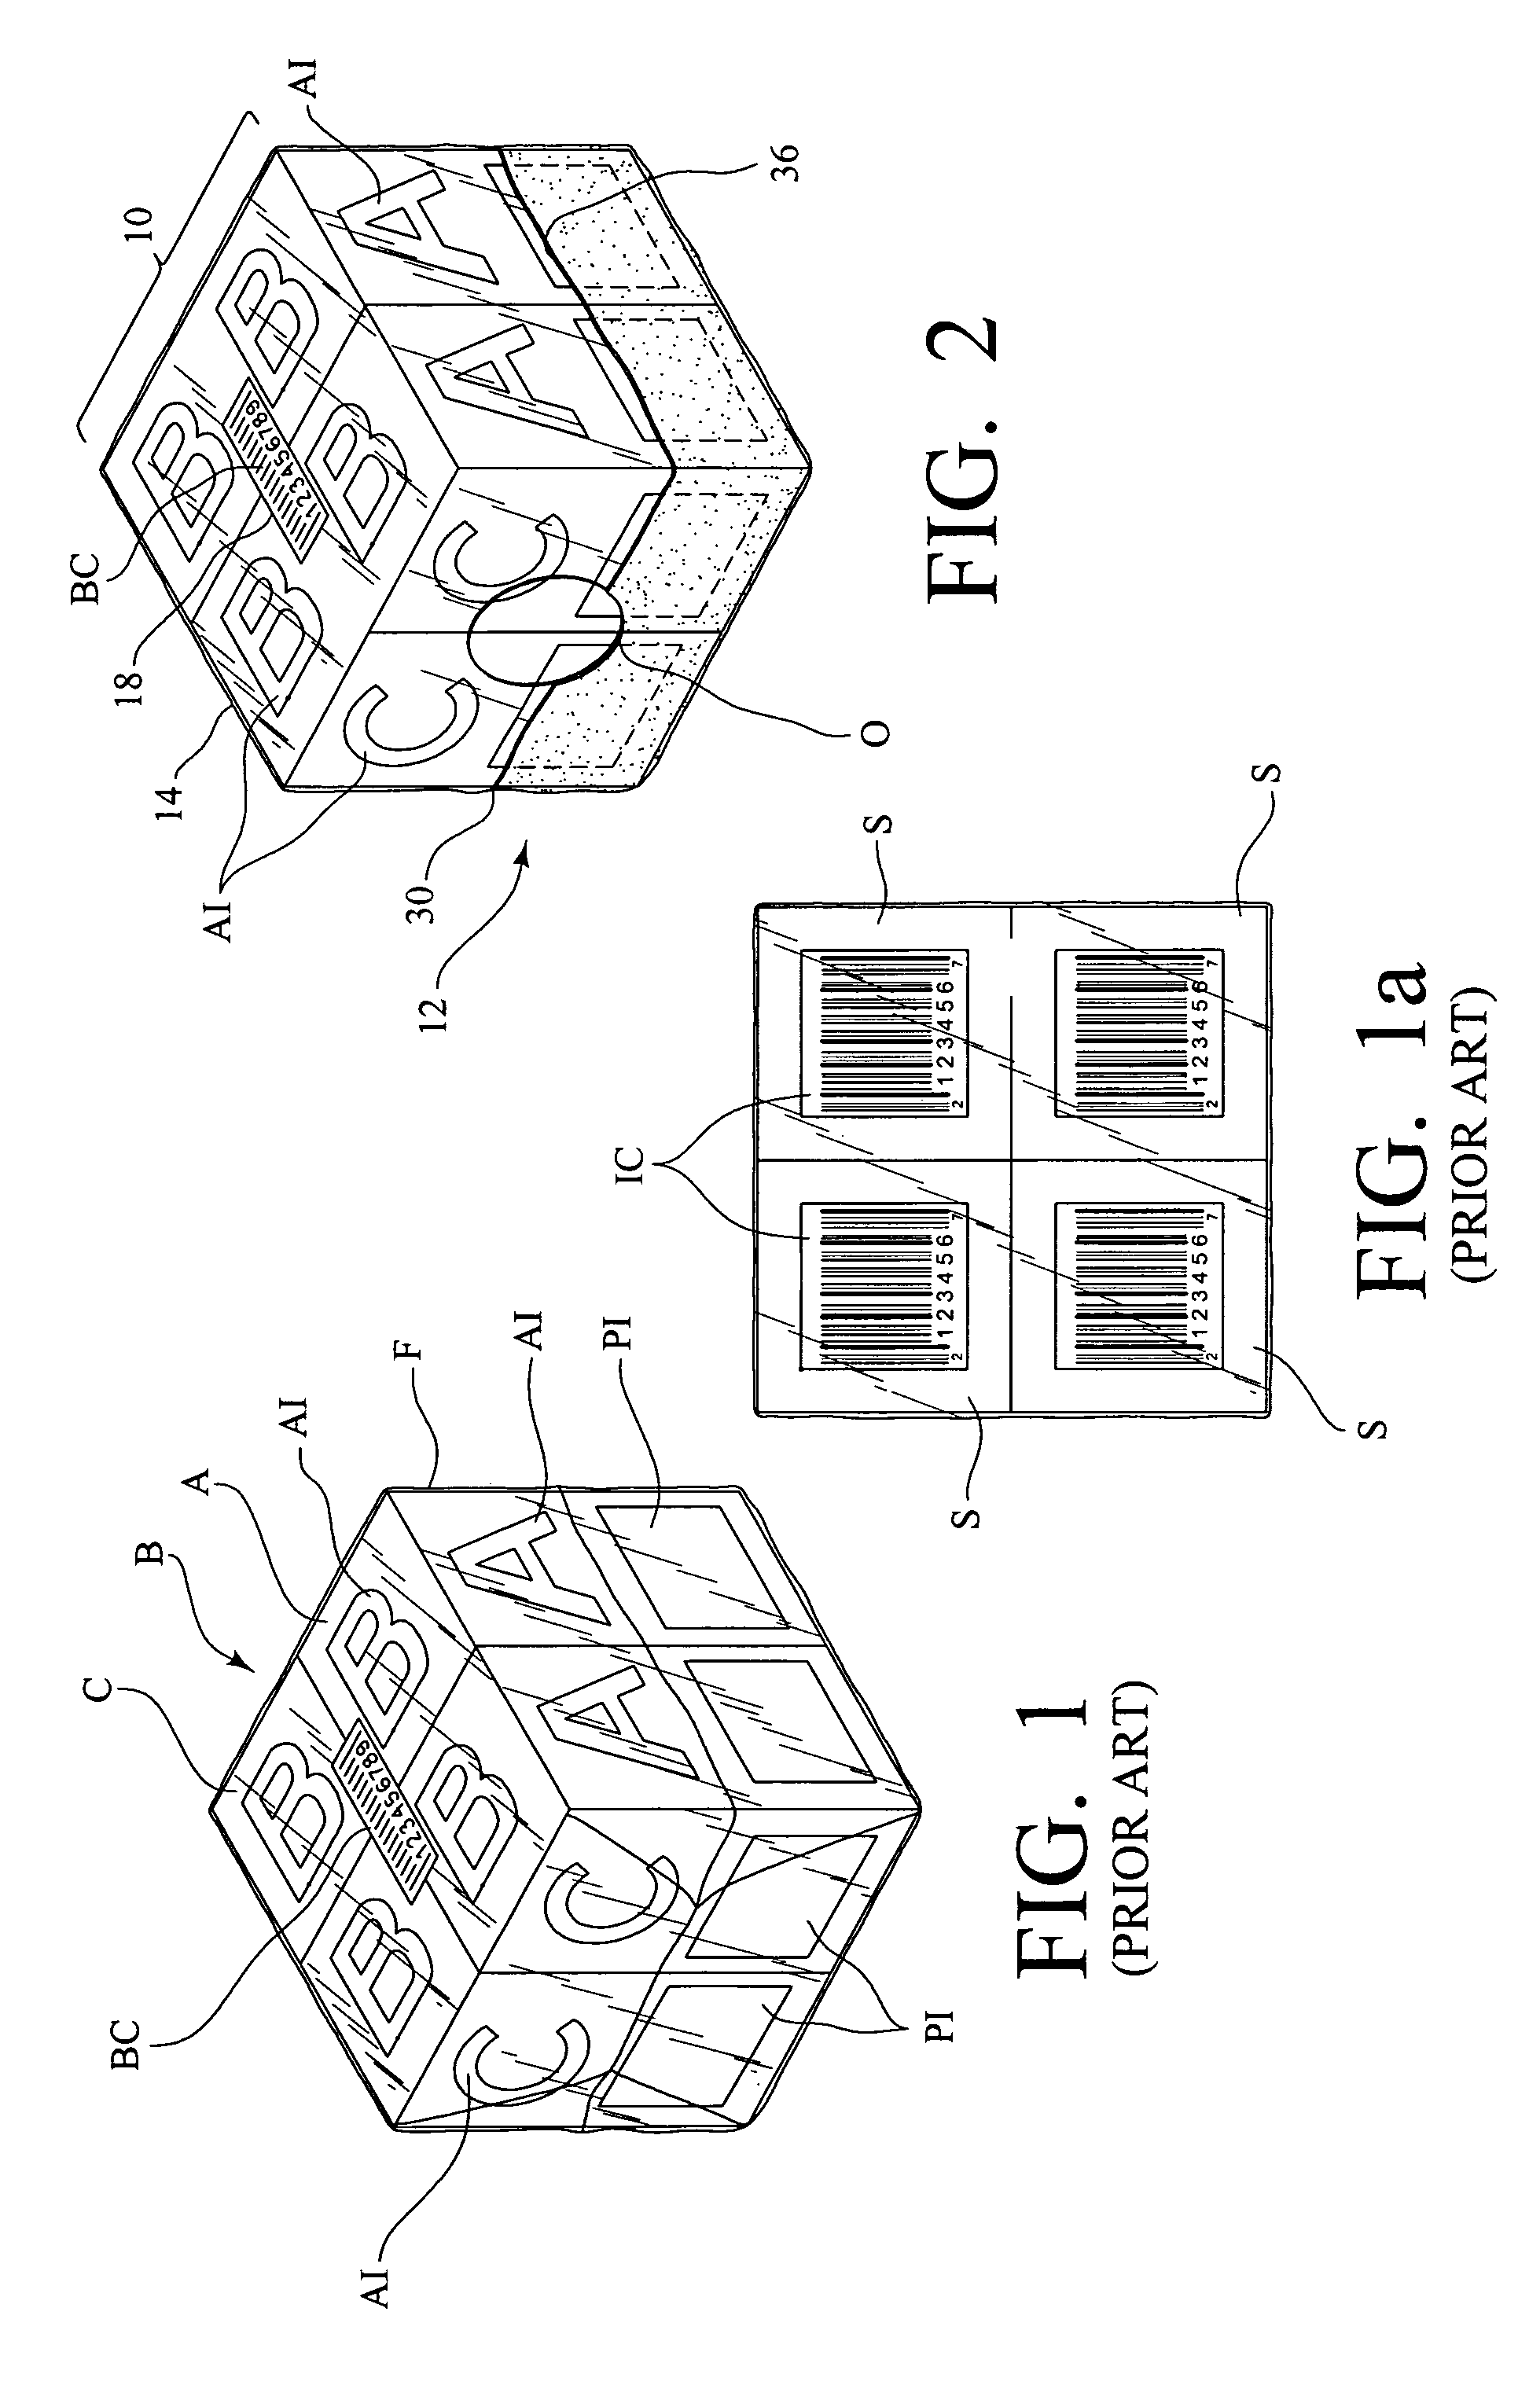 Method for bundling multiple articles together while obscuring individual identification codes and related assembly